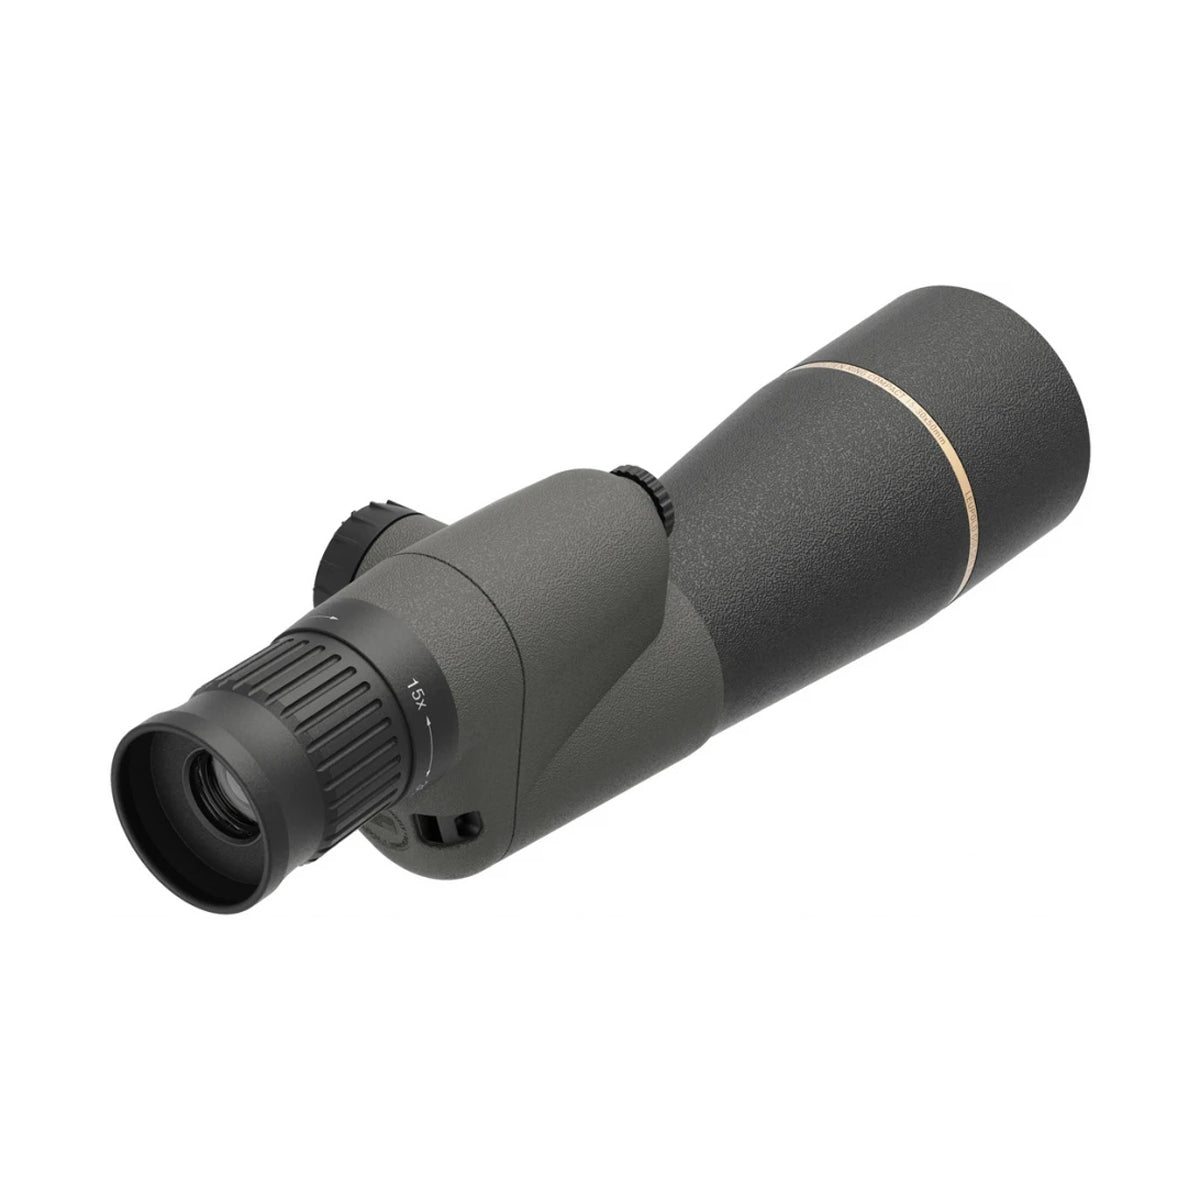 Leupold Gold Ring 15-30x50mm Compact Spotting Scope #120375 in  by GOHUNT | Leupold - GOHUNT Shop